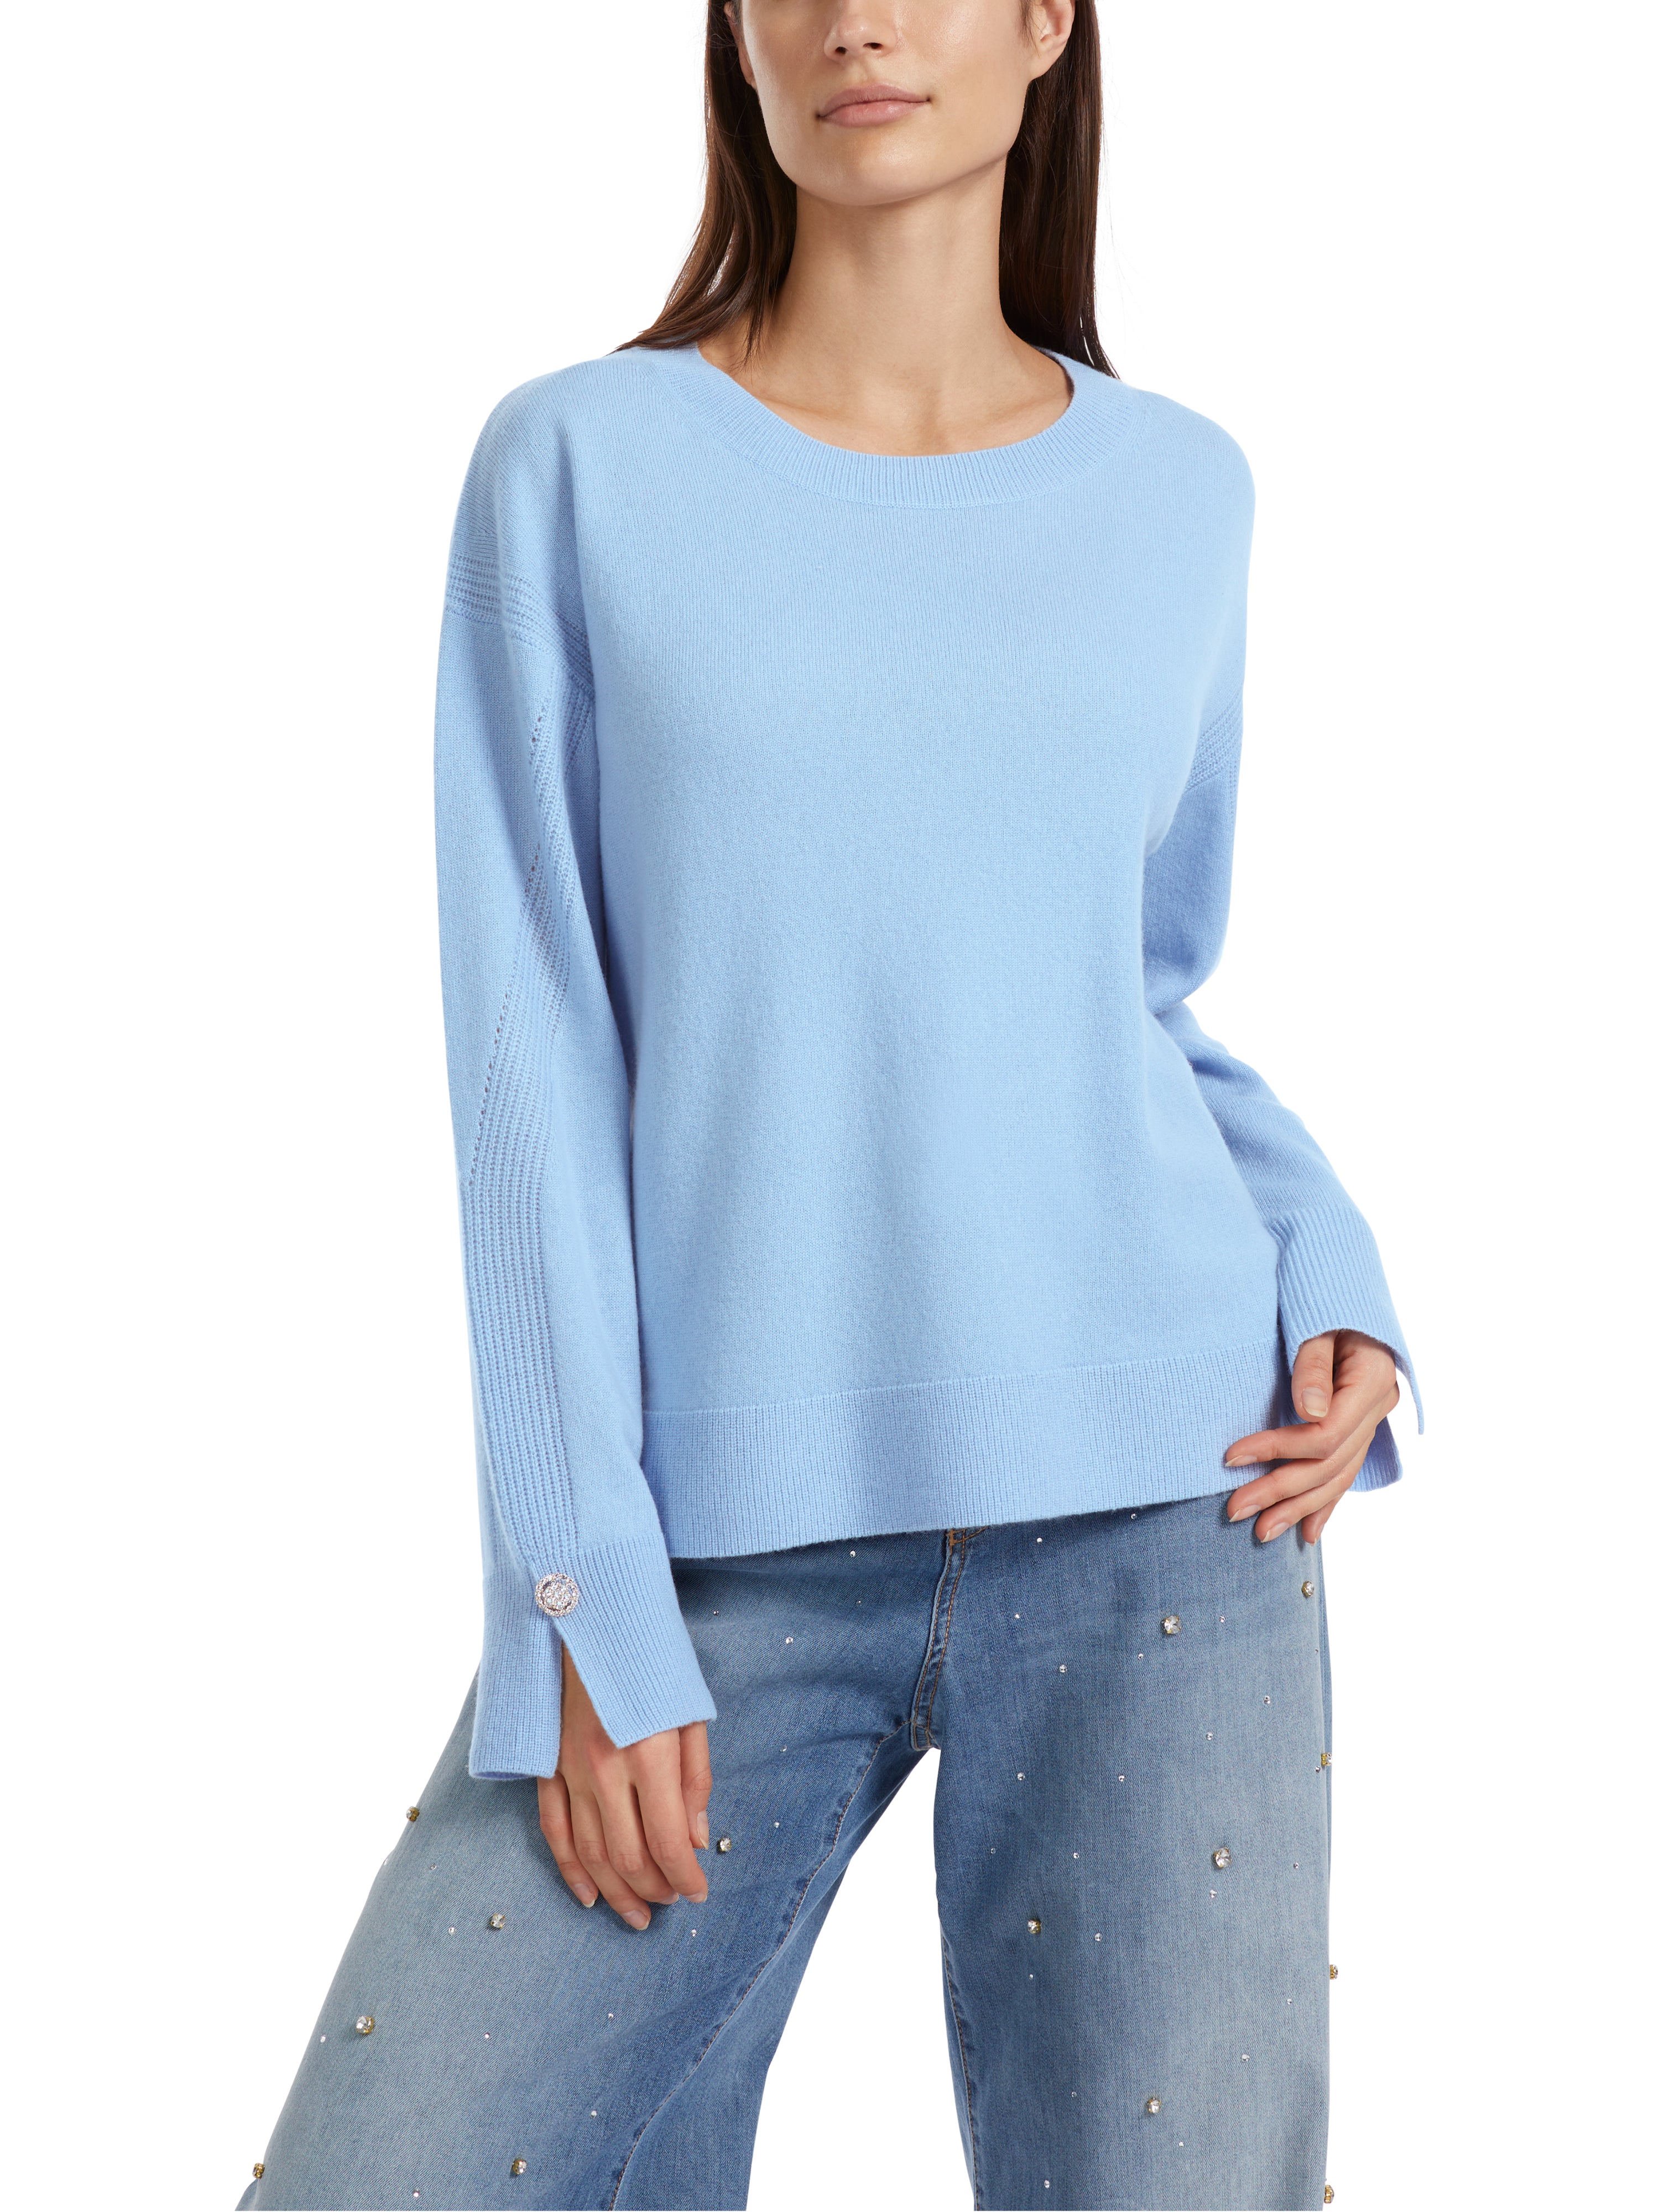 MACBEES MARCCAIN BLUE KNIT SWEATER VC4111M51 223